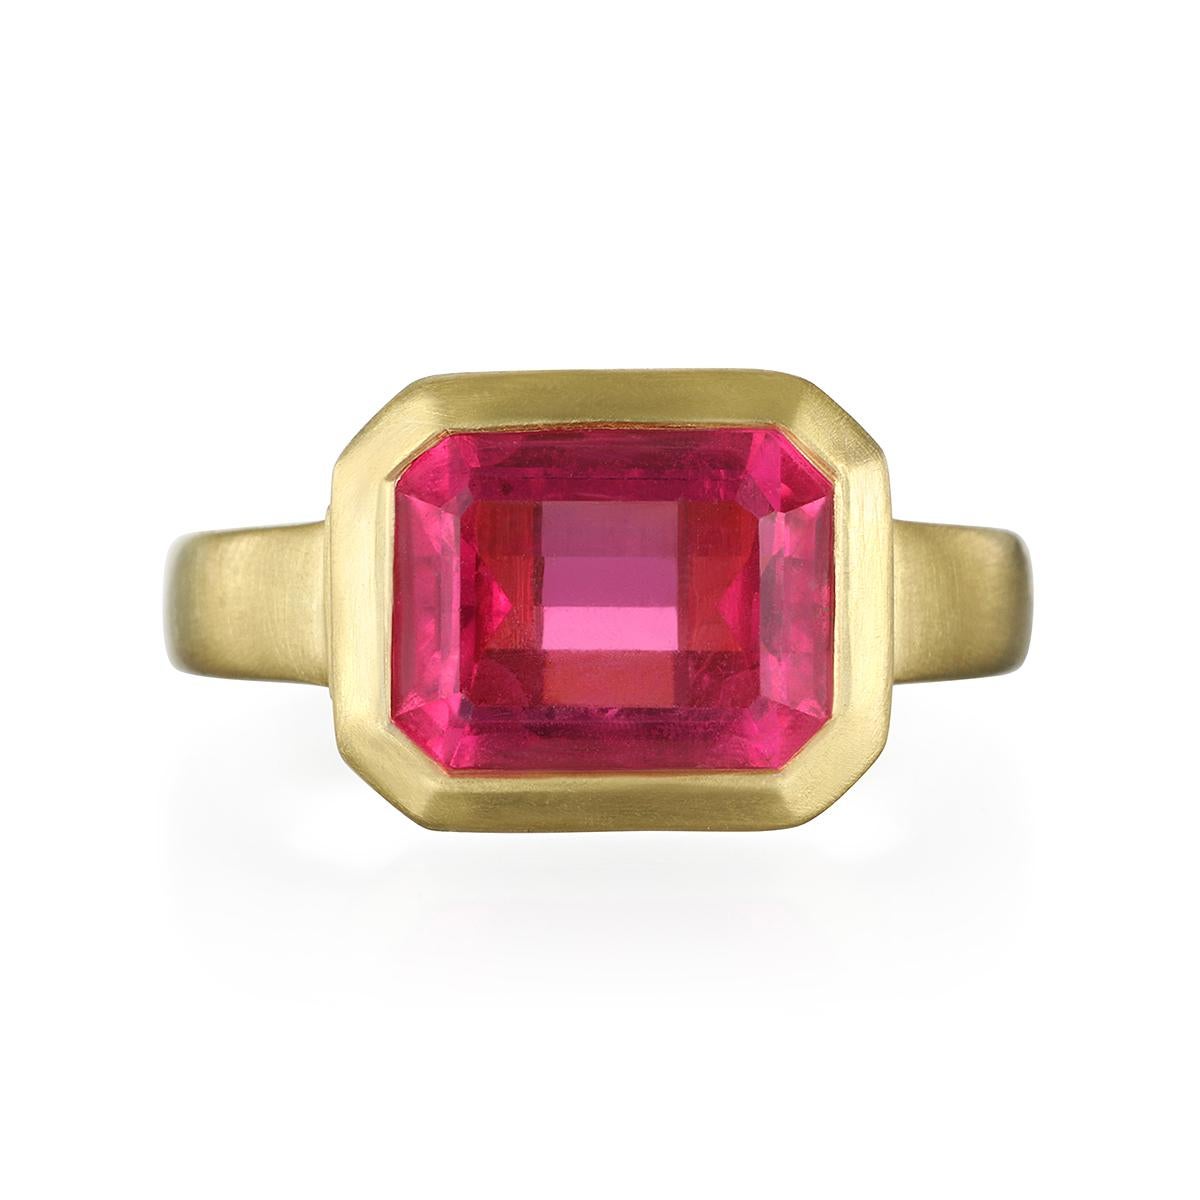 Pretty in Pink!
If you're looking for a pop of color to add to your jewelry collection, this is it! Faye Kim's 18k gold ring in Hot Pink Tourmaline is set in a bezel with an open gallery to keep it light, fun, and carefree. The color is further